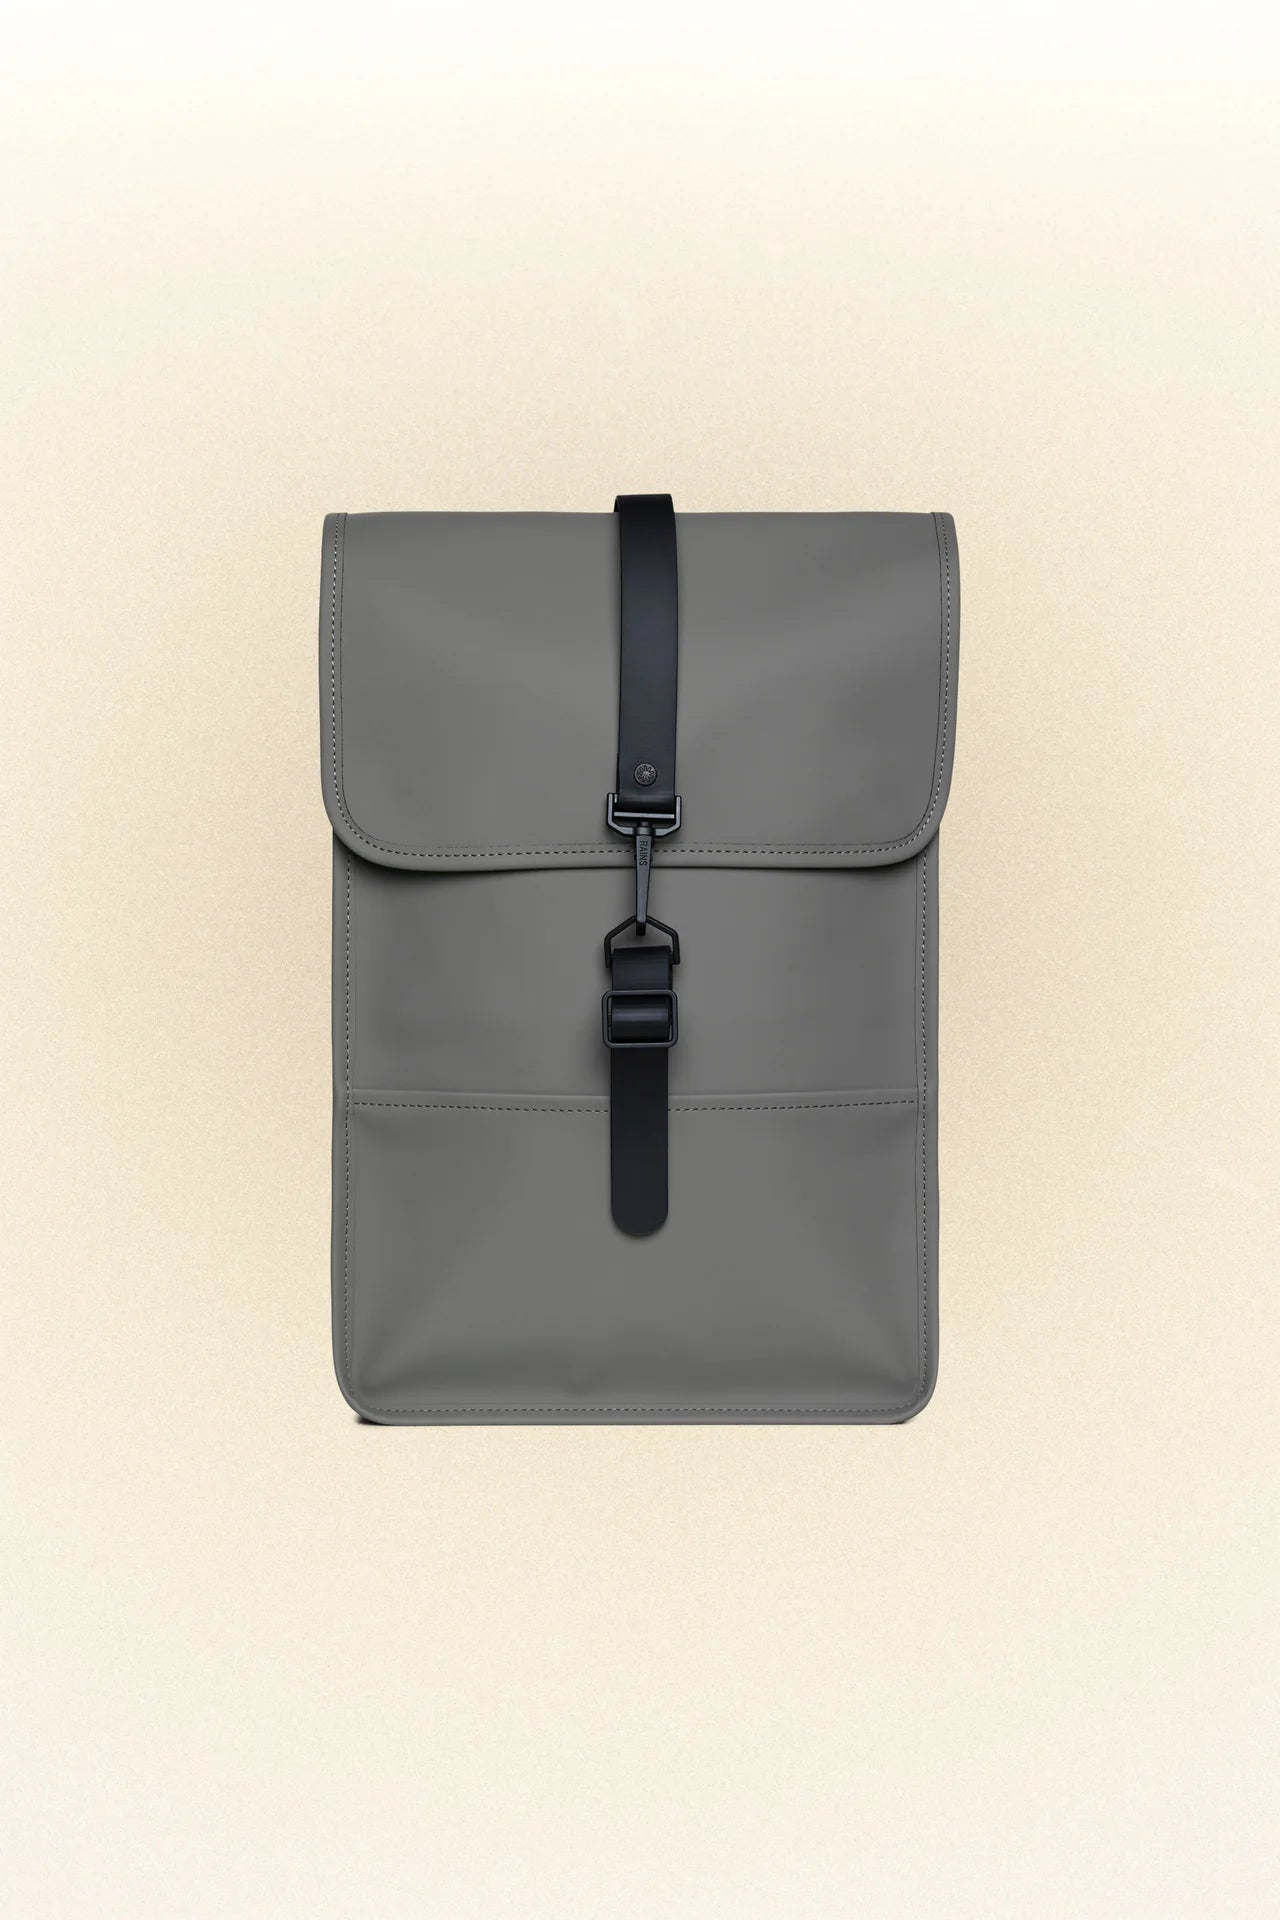 A Rains Backpack Mini with black straps and a laptop pocket, on a white background.